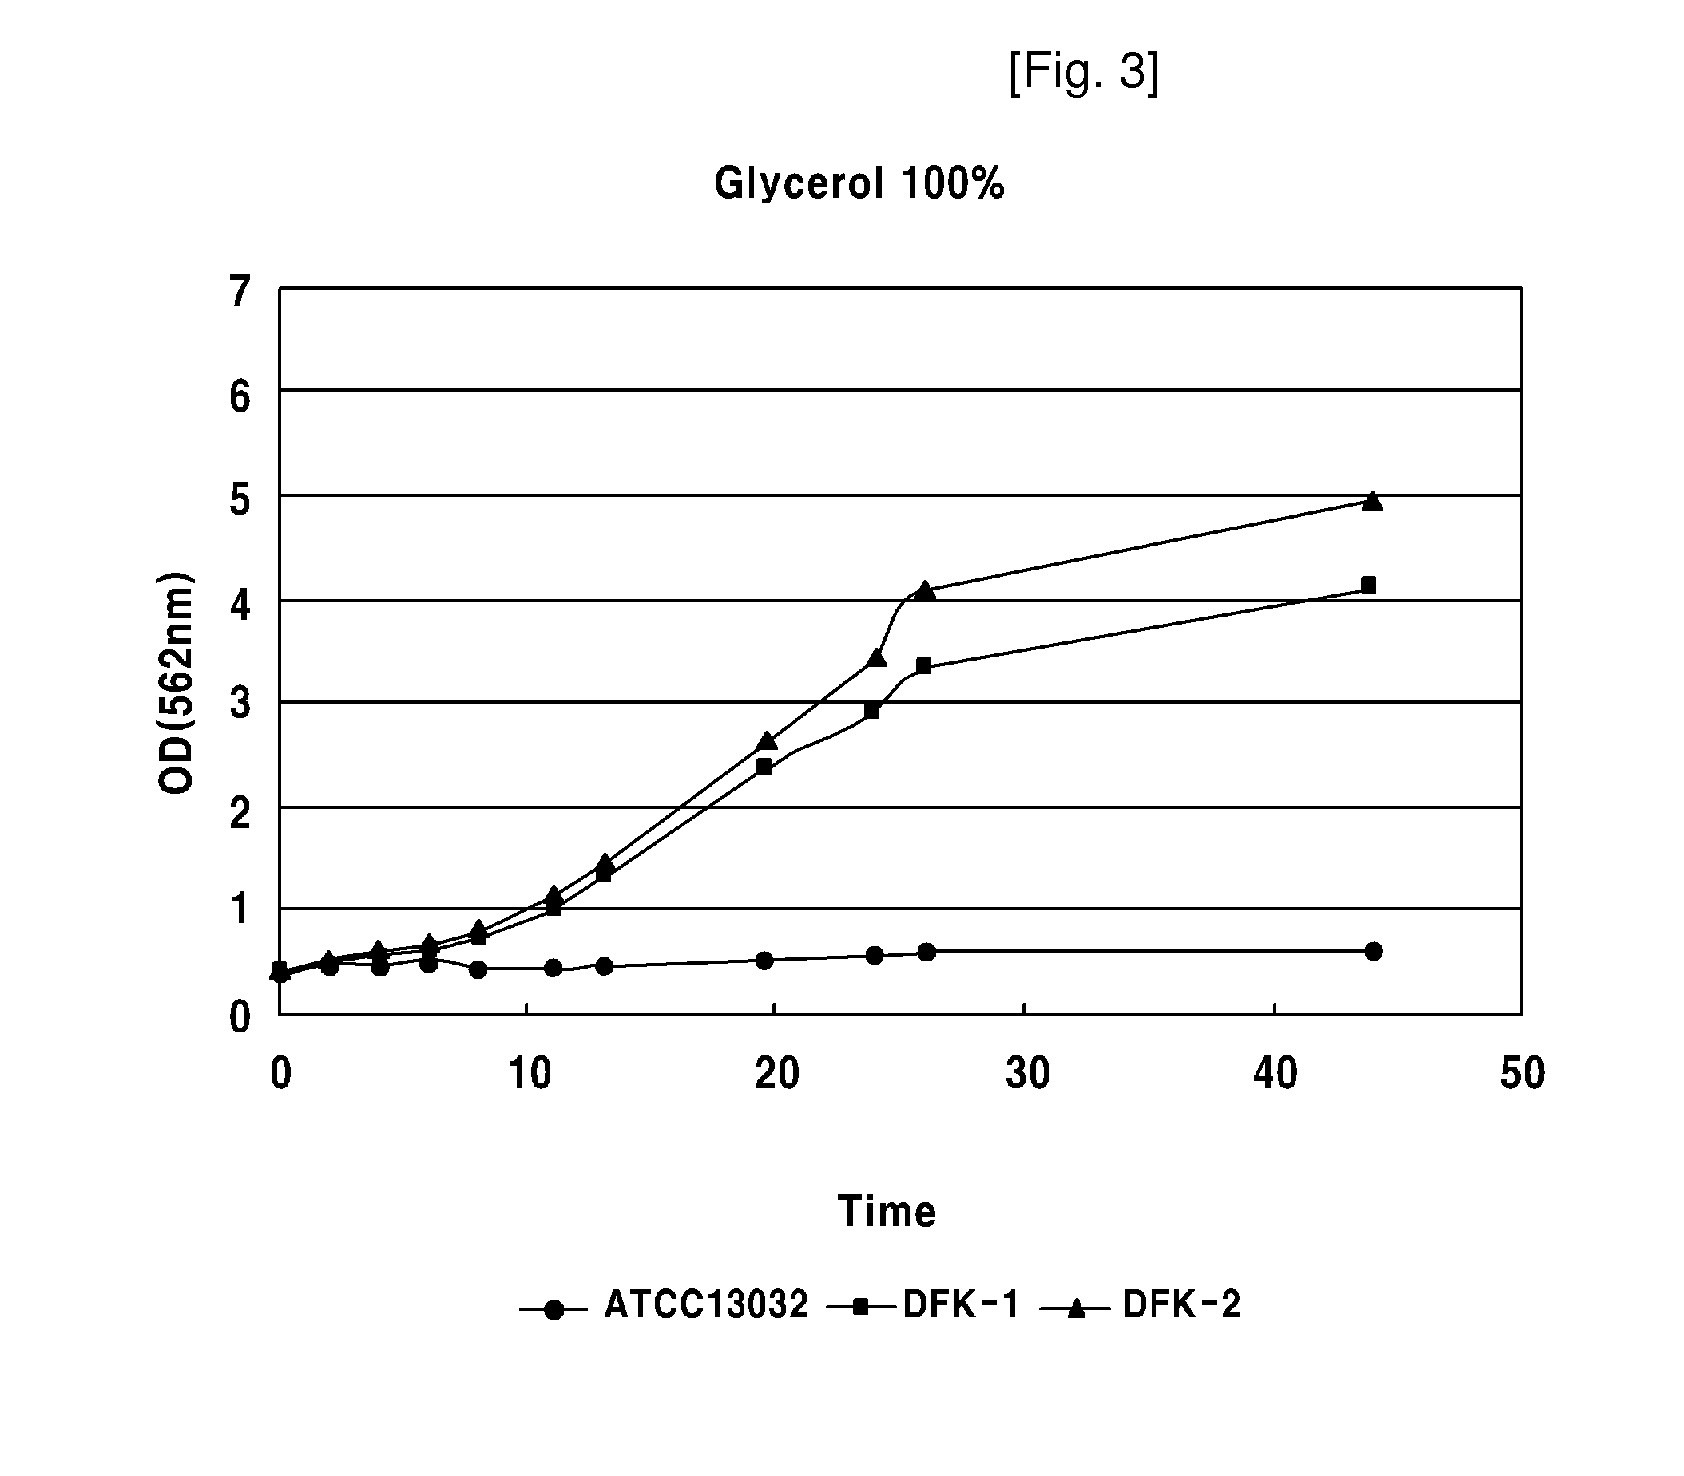 Process for Producing Fermentation Product from Carbon Sources Containing Glycerol using Corynebacteria